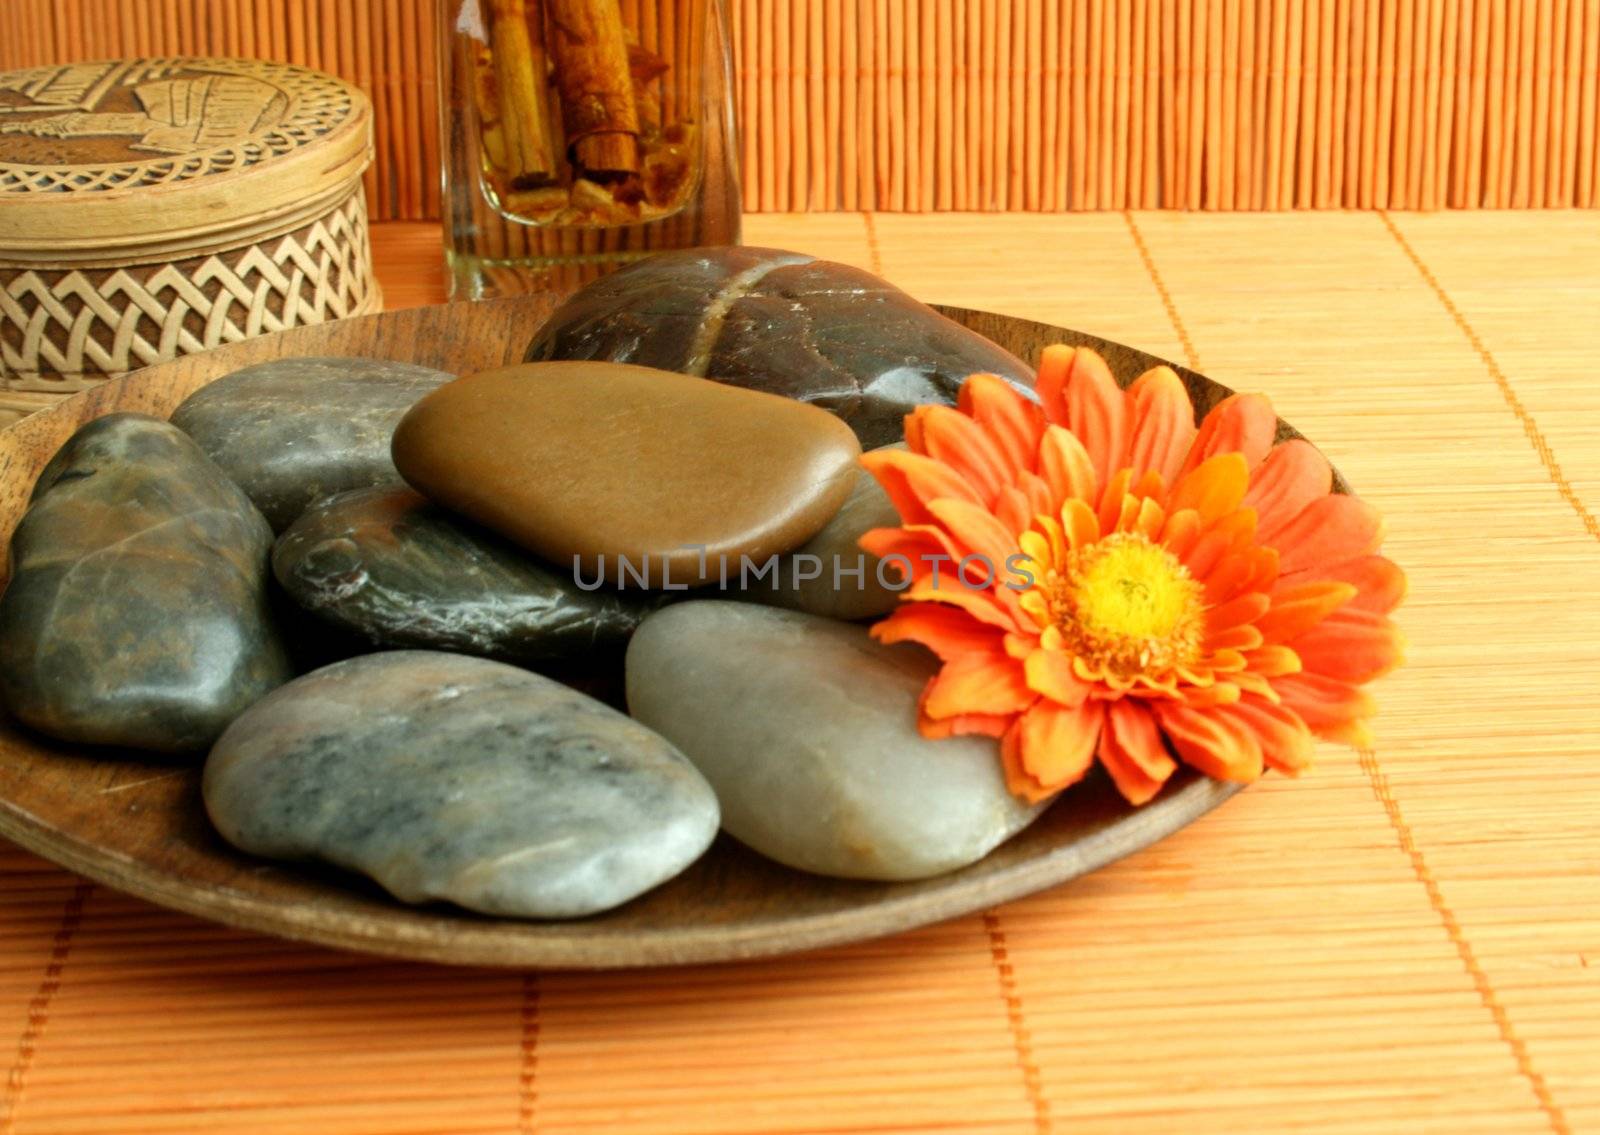 Stones lay on a brown plate and a bright flower